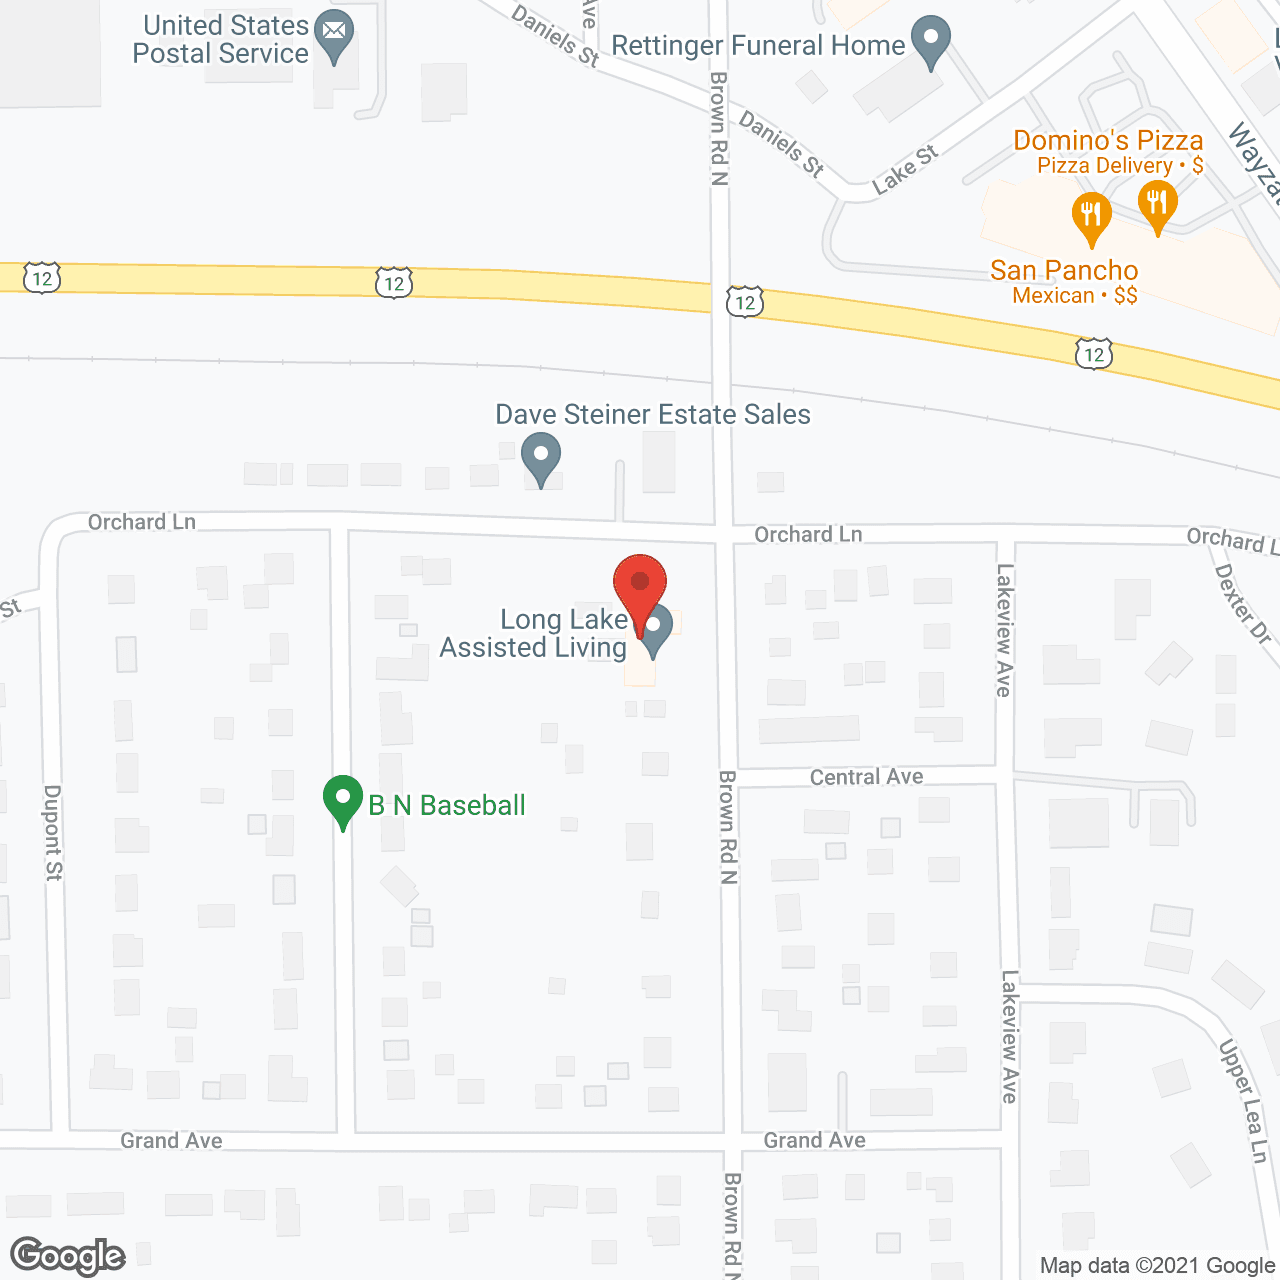 Long Lake Assisted Living in google map